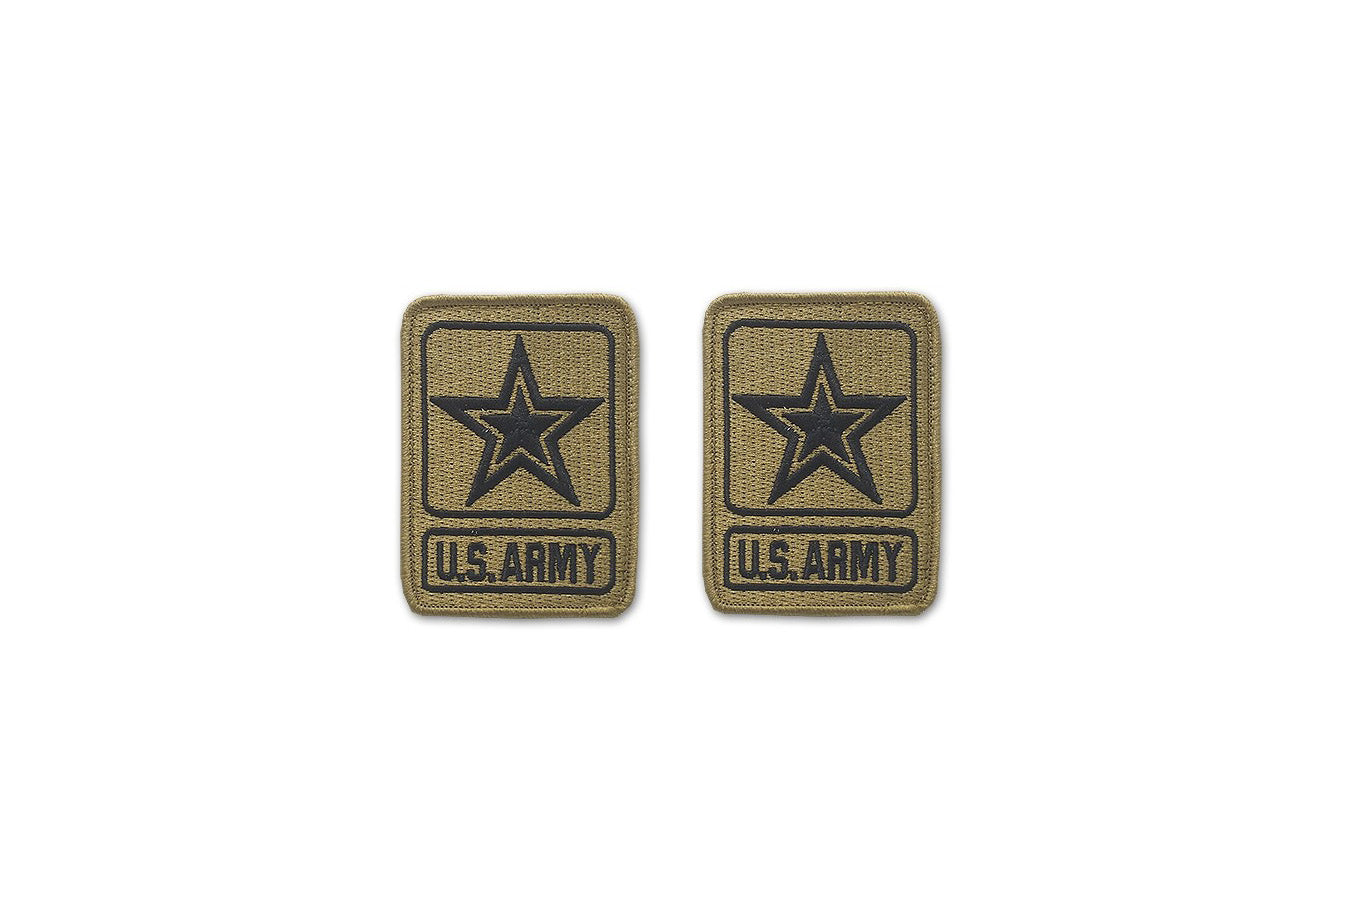 US Army Mission Star Patch  United States Army Patches